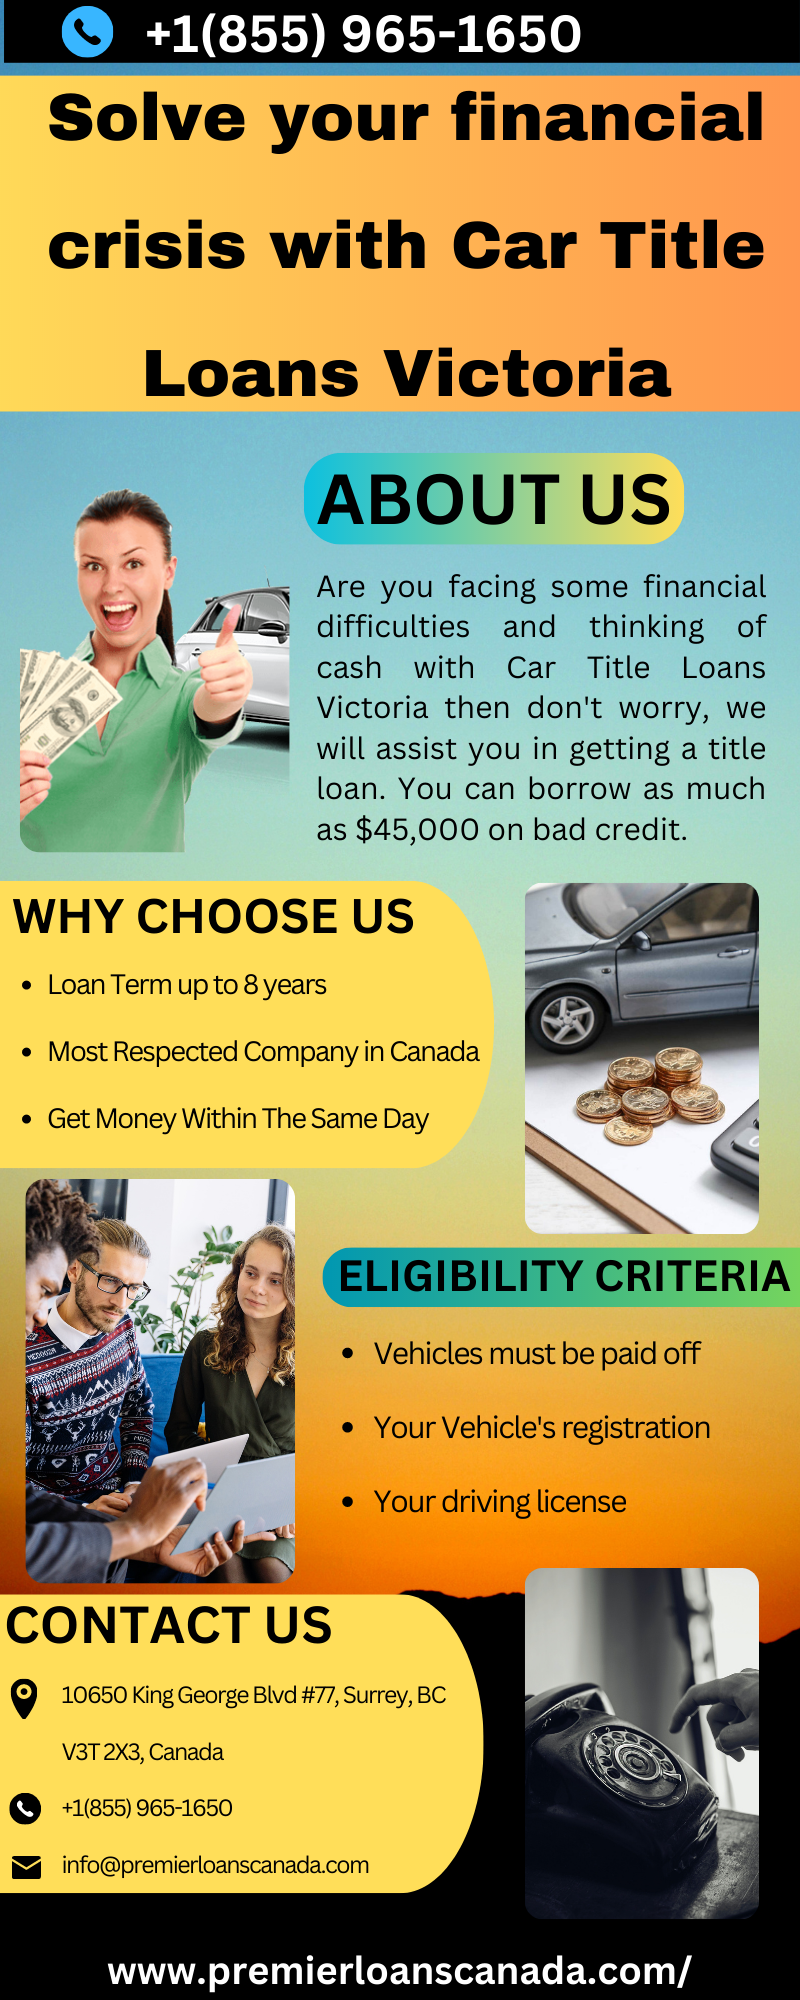 Solve your financial crisis with Car Title Loans Victoria